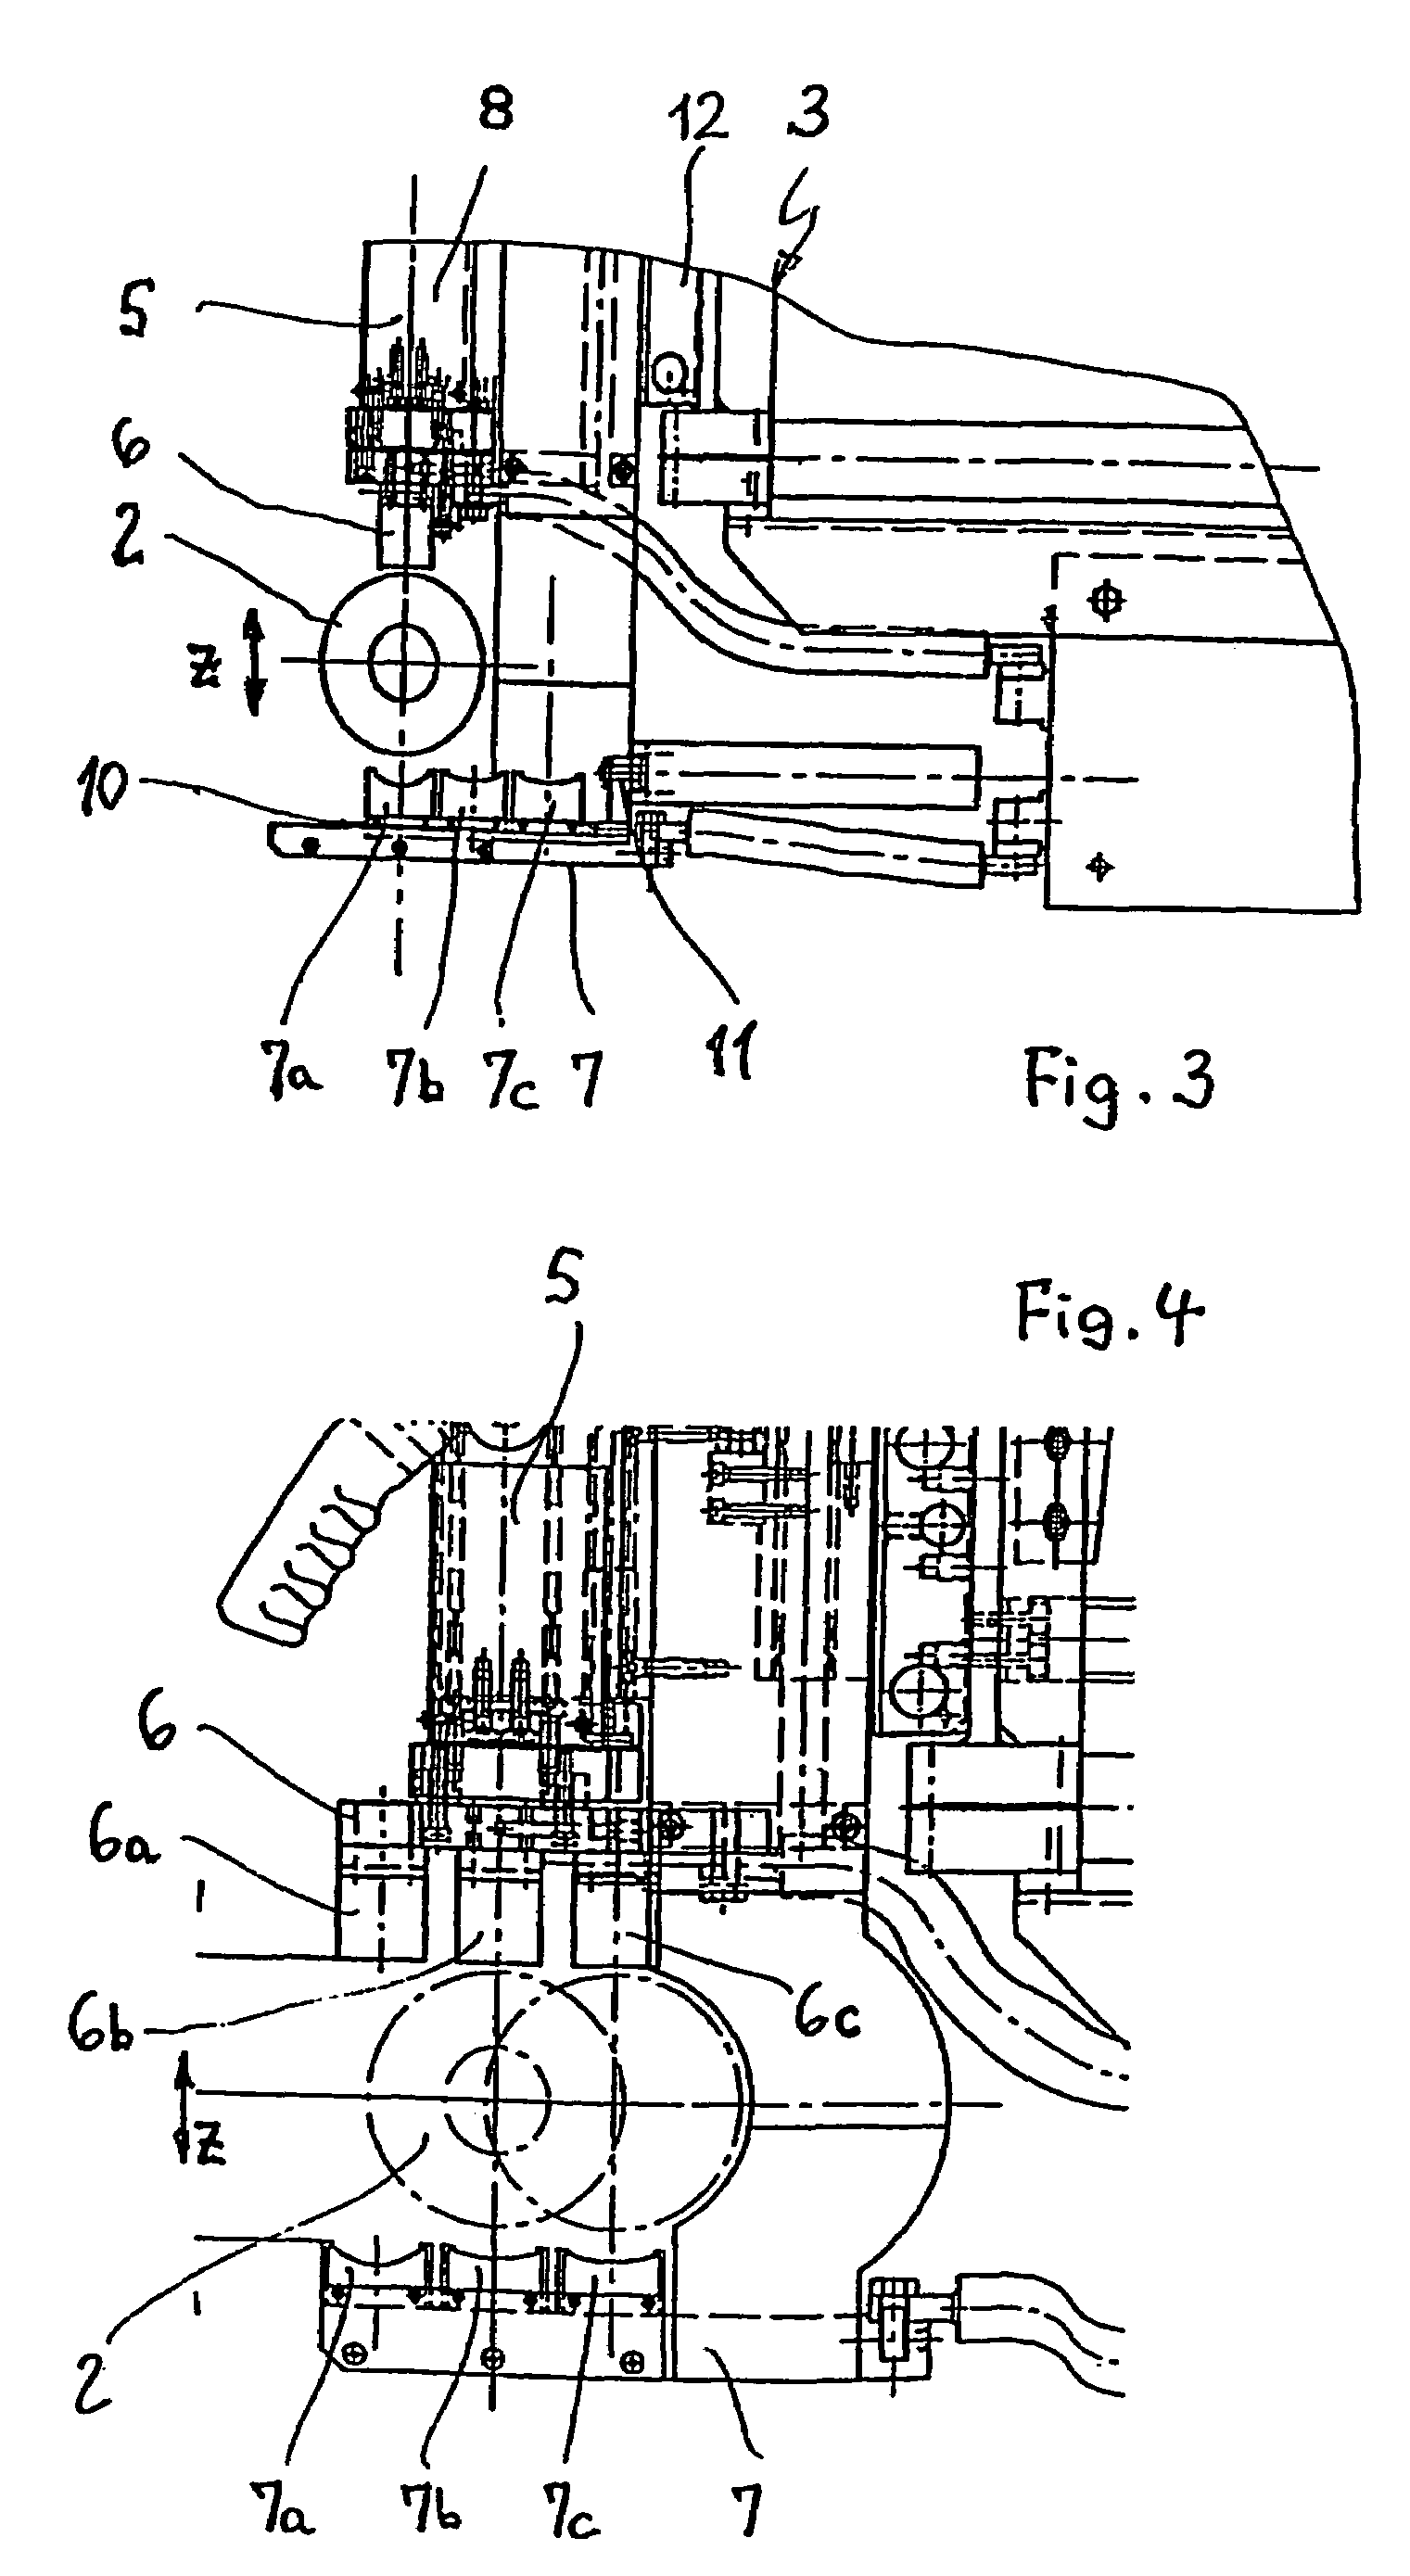 Device and method for fastening balancing weights to rotors, in particular to propeller shafts or cardan shafts